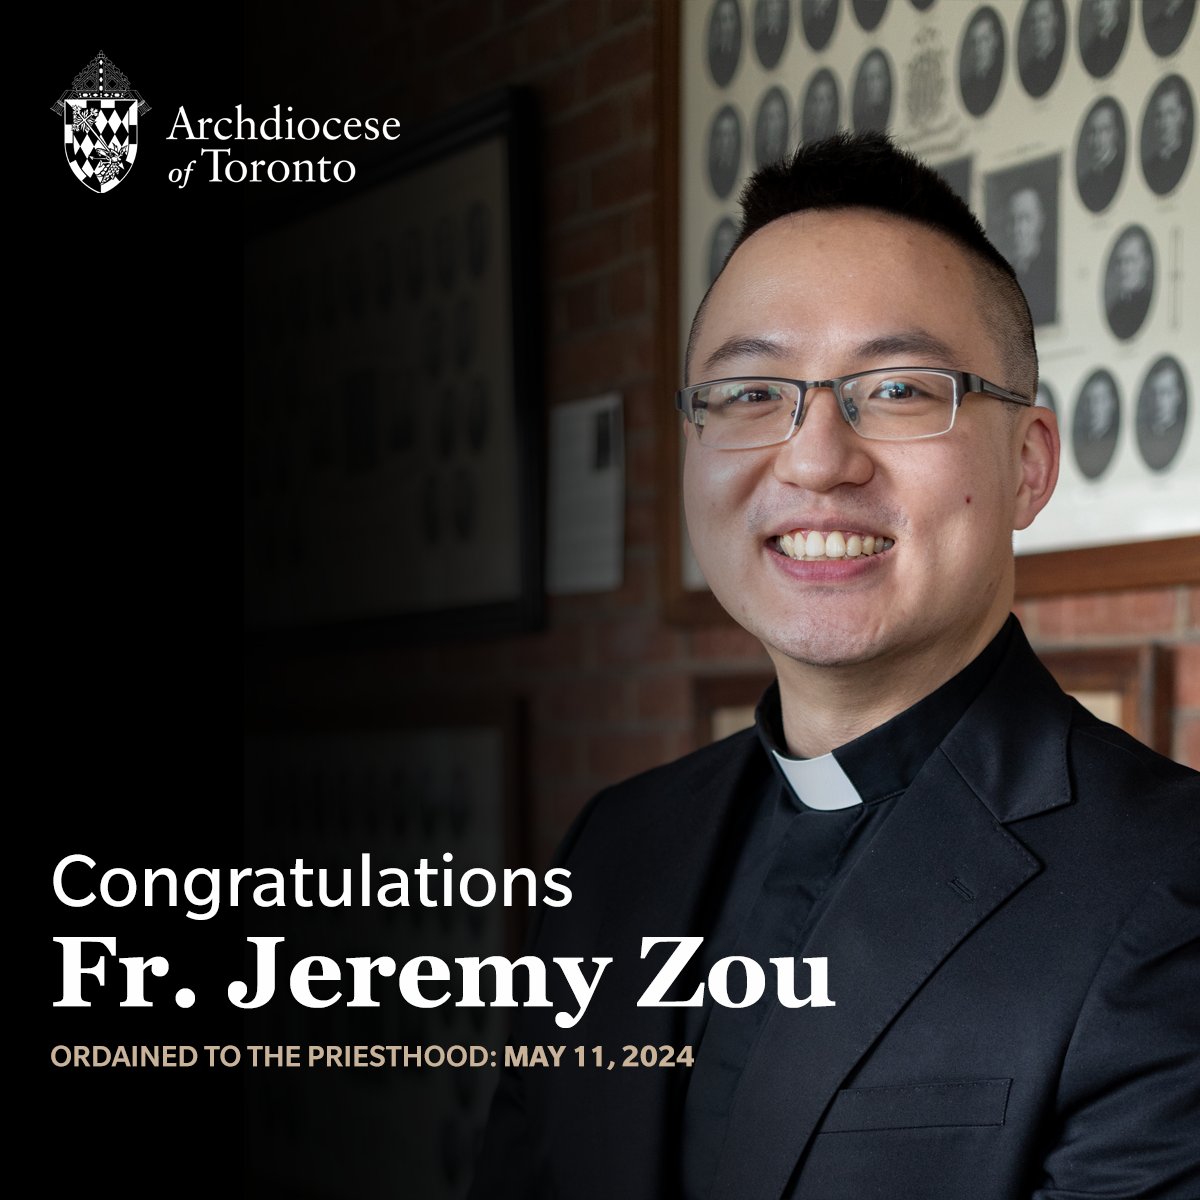 Congratulations, Fr. Jeremy Ling Hong Zou! Ordained on May 11, 2024, he looks forward to serving the Lord in the Archdiocese of Toronto. Fr. Zou will serve as associate pastor at St. Barnabas Parish, Scarborough. #catholicTO